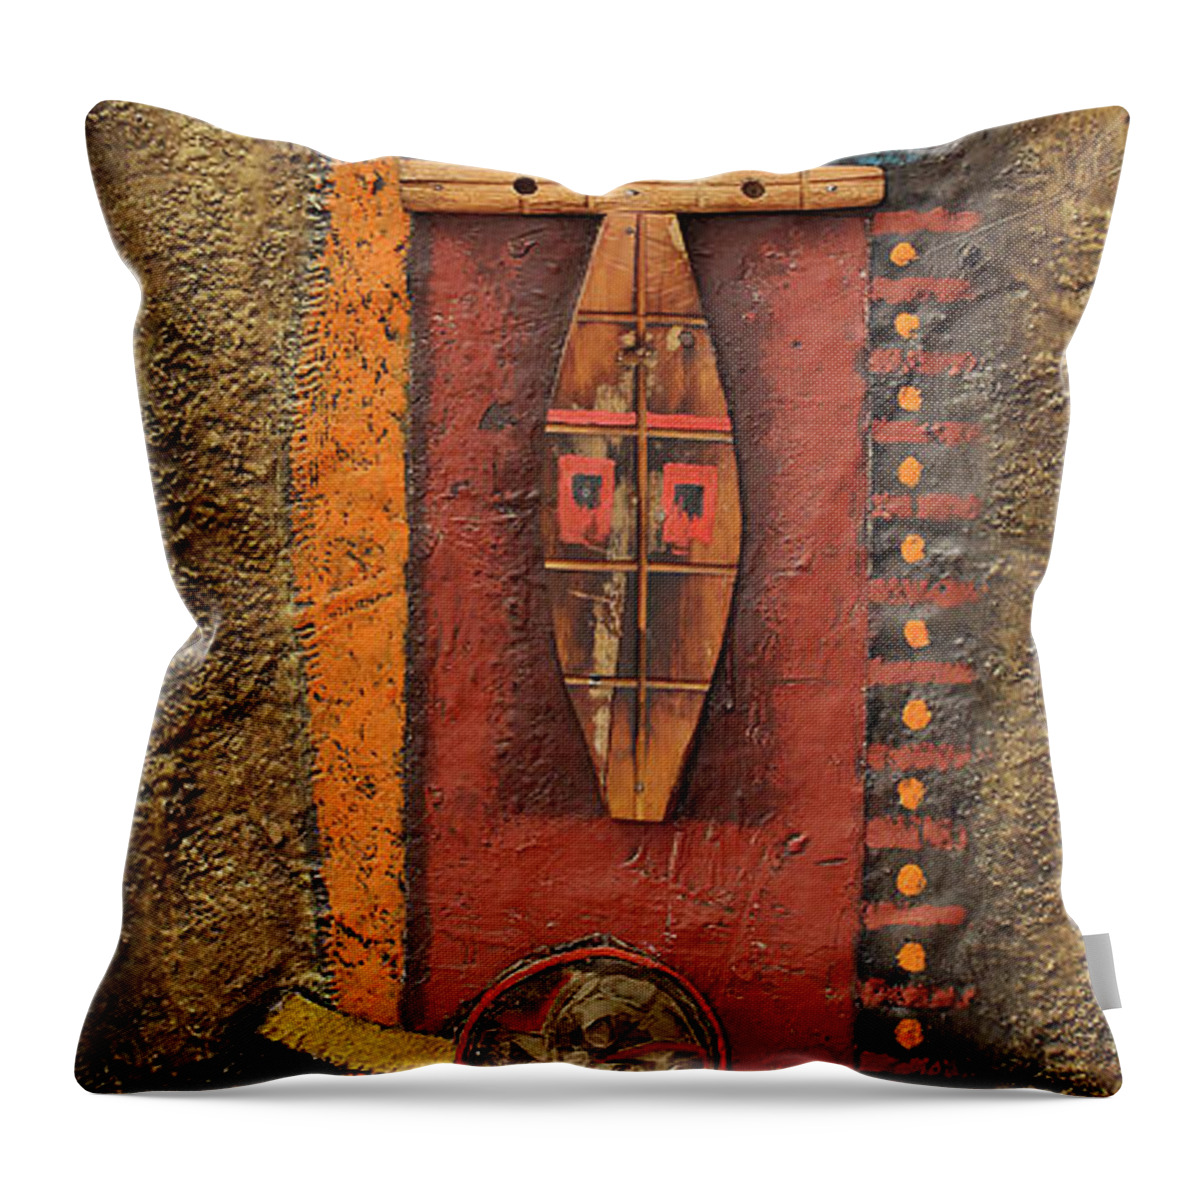 African Art Throw Pillow featuring the painting All Systems Go by Michael Nene